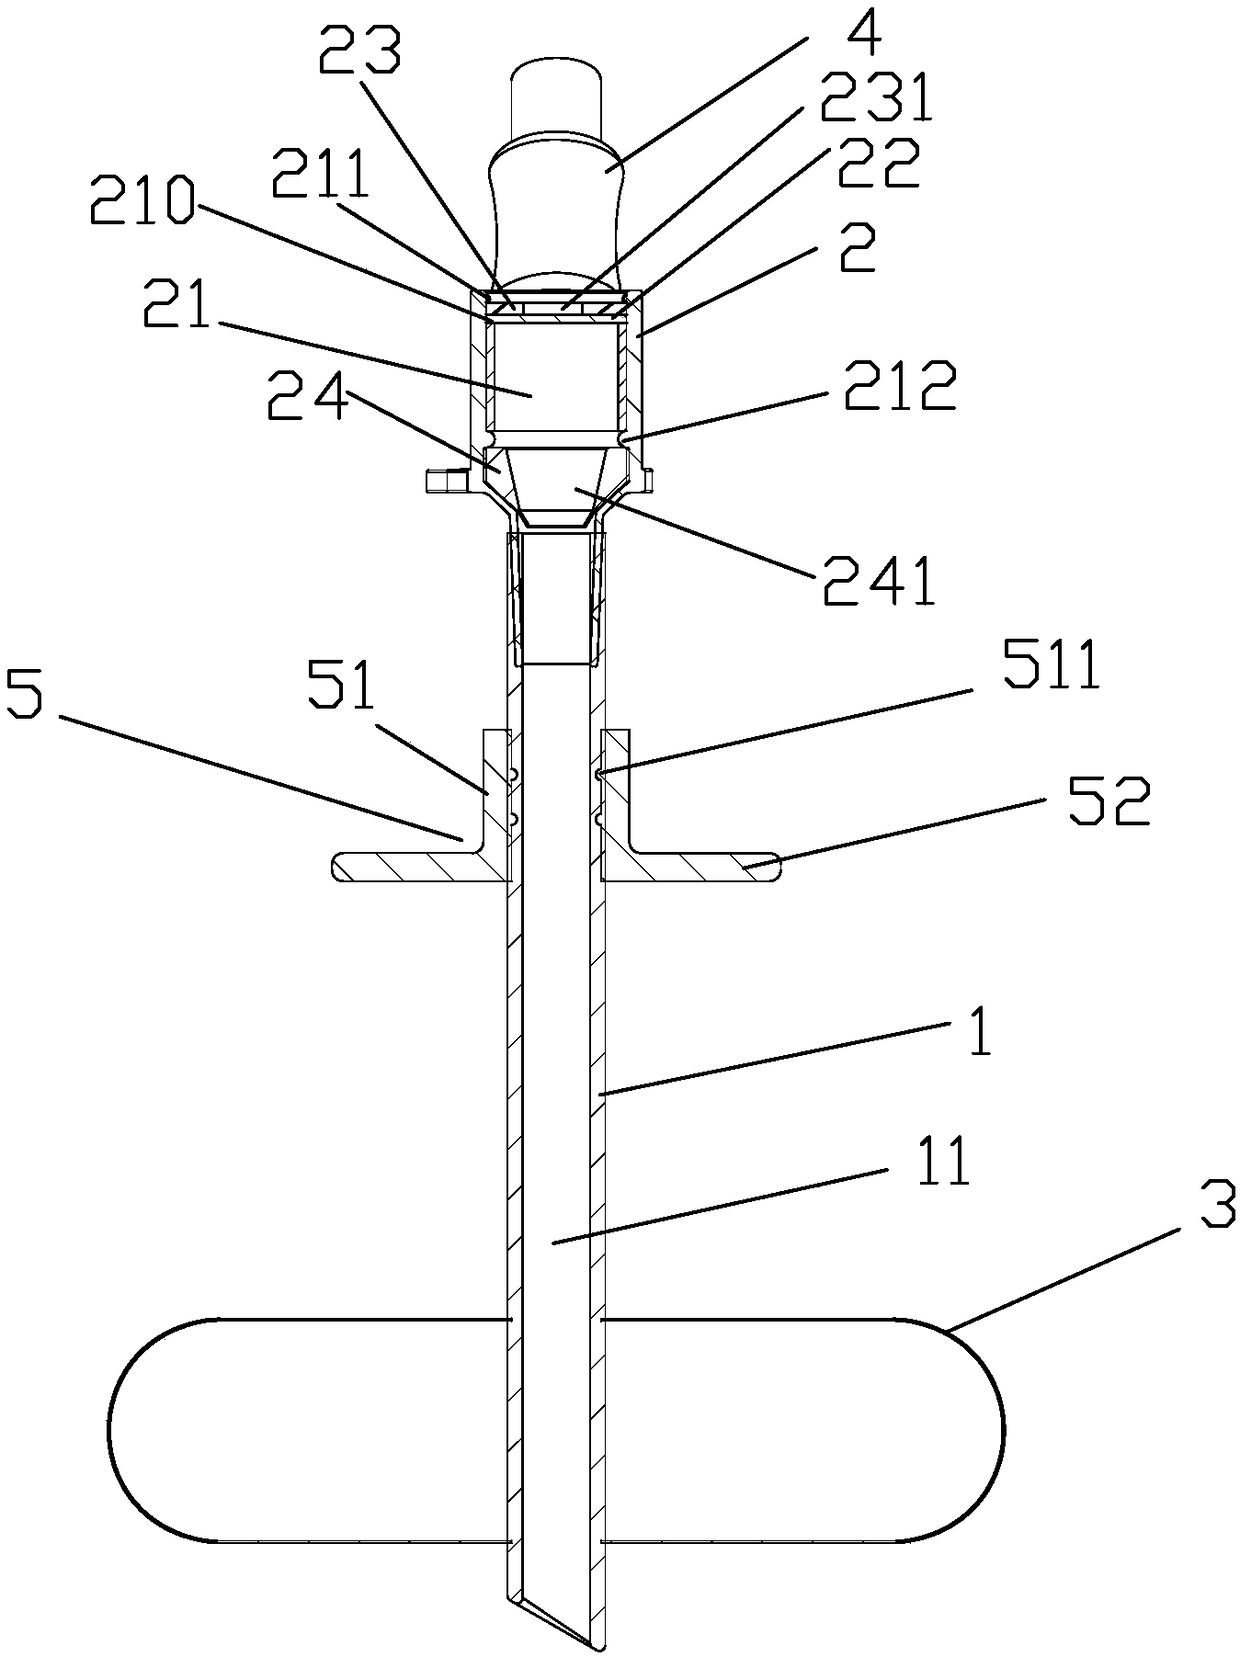 Device for replacement of stomach and intestine fistula